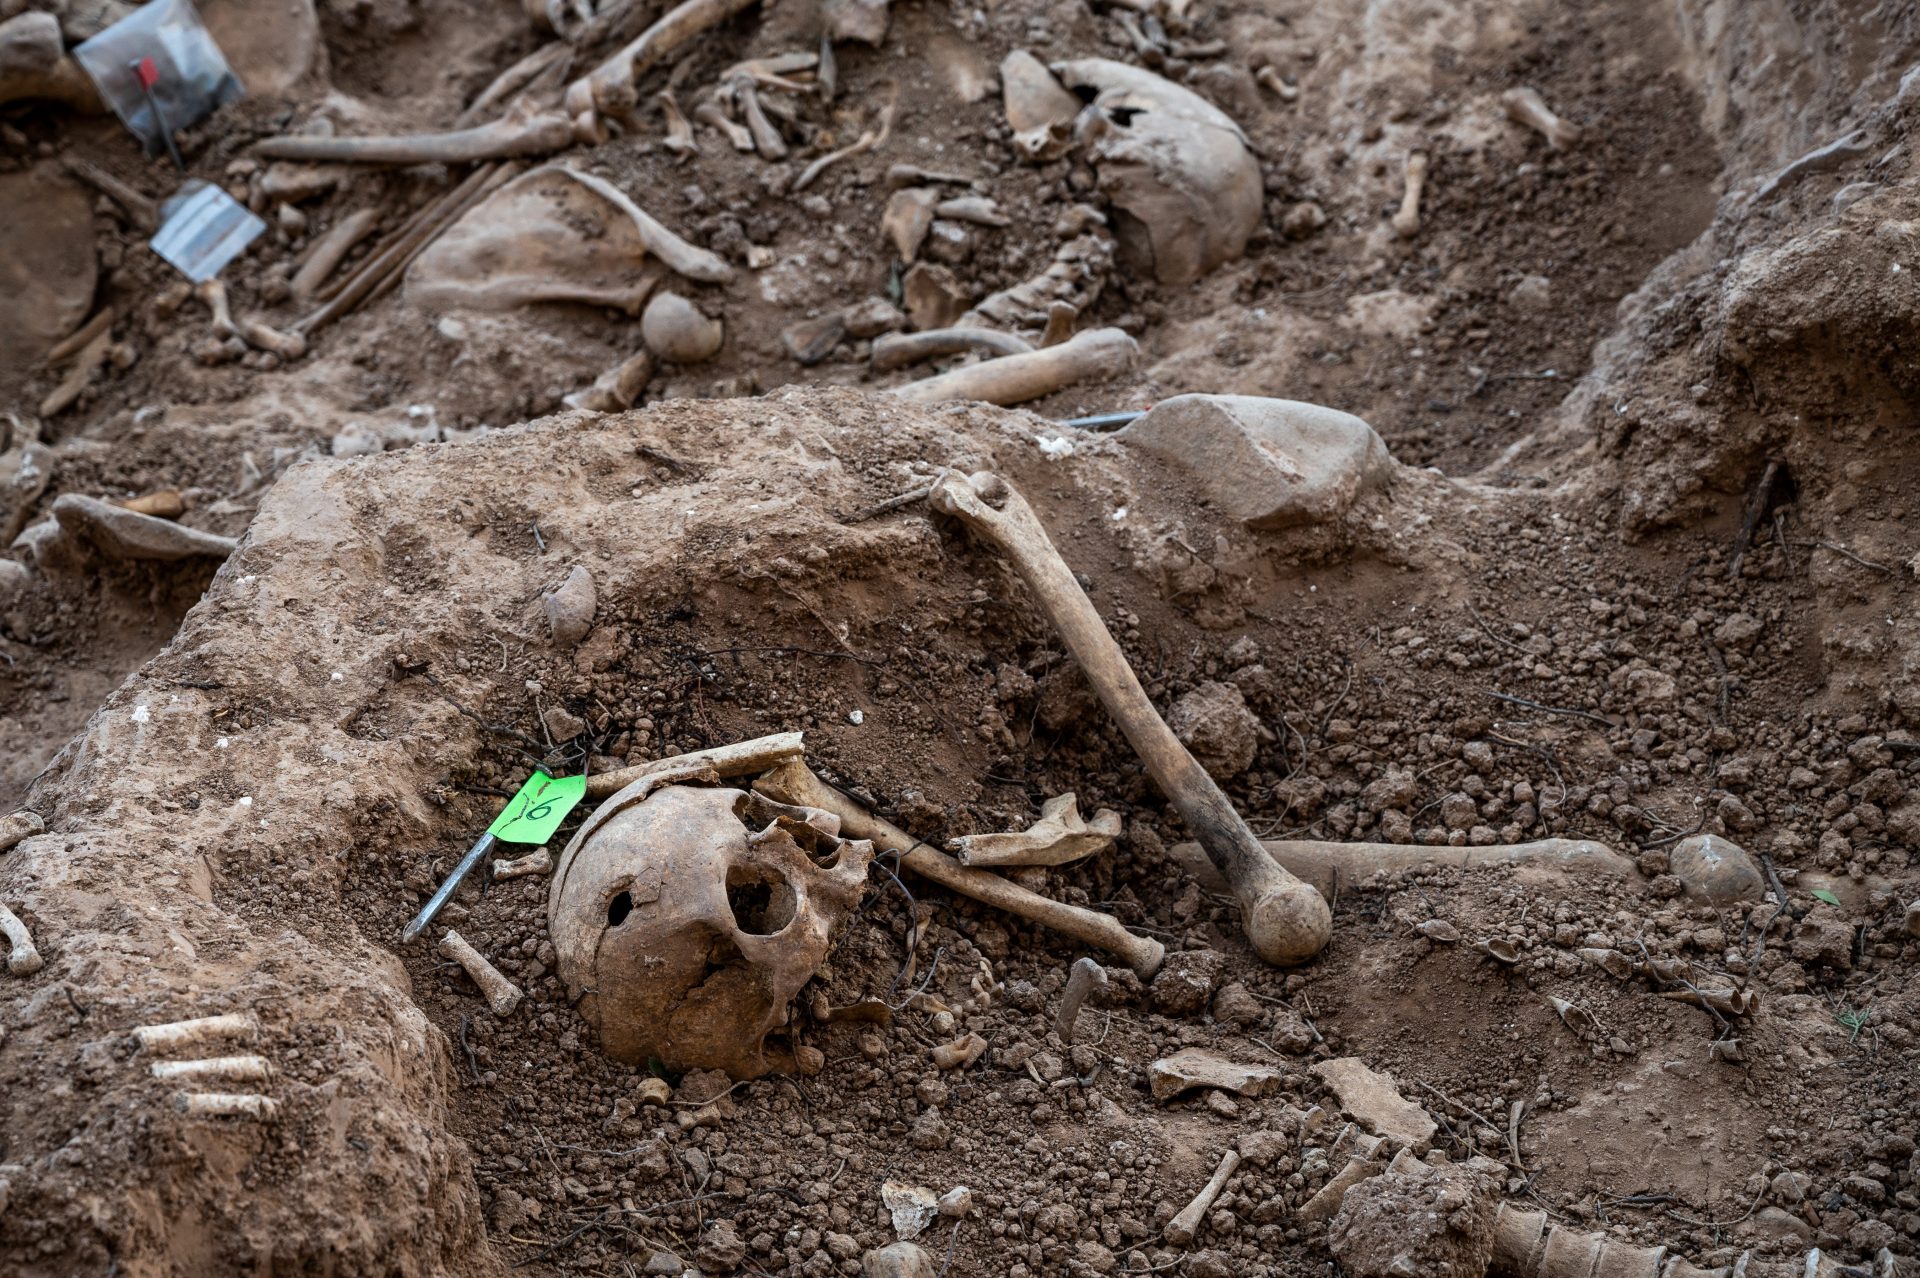 A cranium with a bullet hole is seen in a mass grave on November 15, 2021 in Belchite, Spain. A mass grave of 150 civilians killed in Belchite (Zaragoza) two days after the outbreak of the Spanish Civil War is being uncovered by scientists. (Photo by Marcos del Mazo/Getty Images)